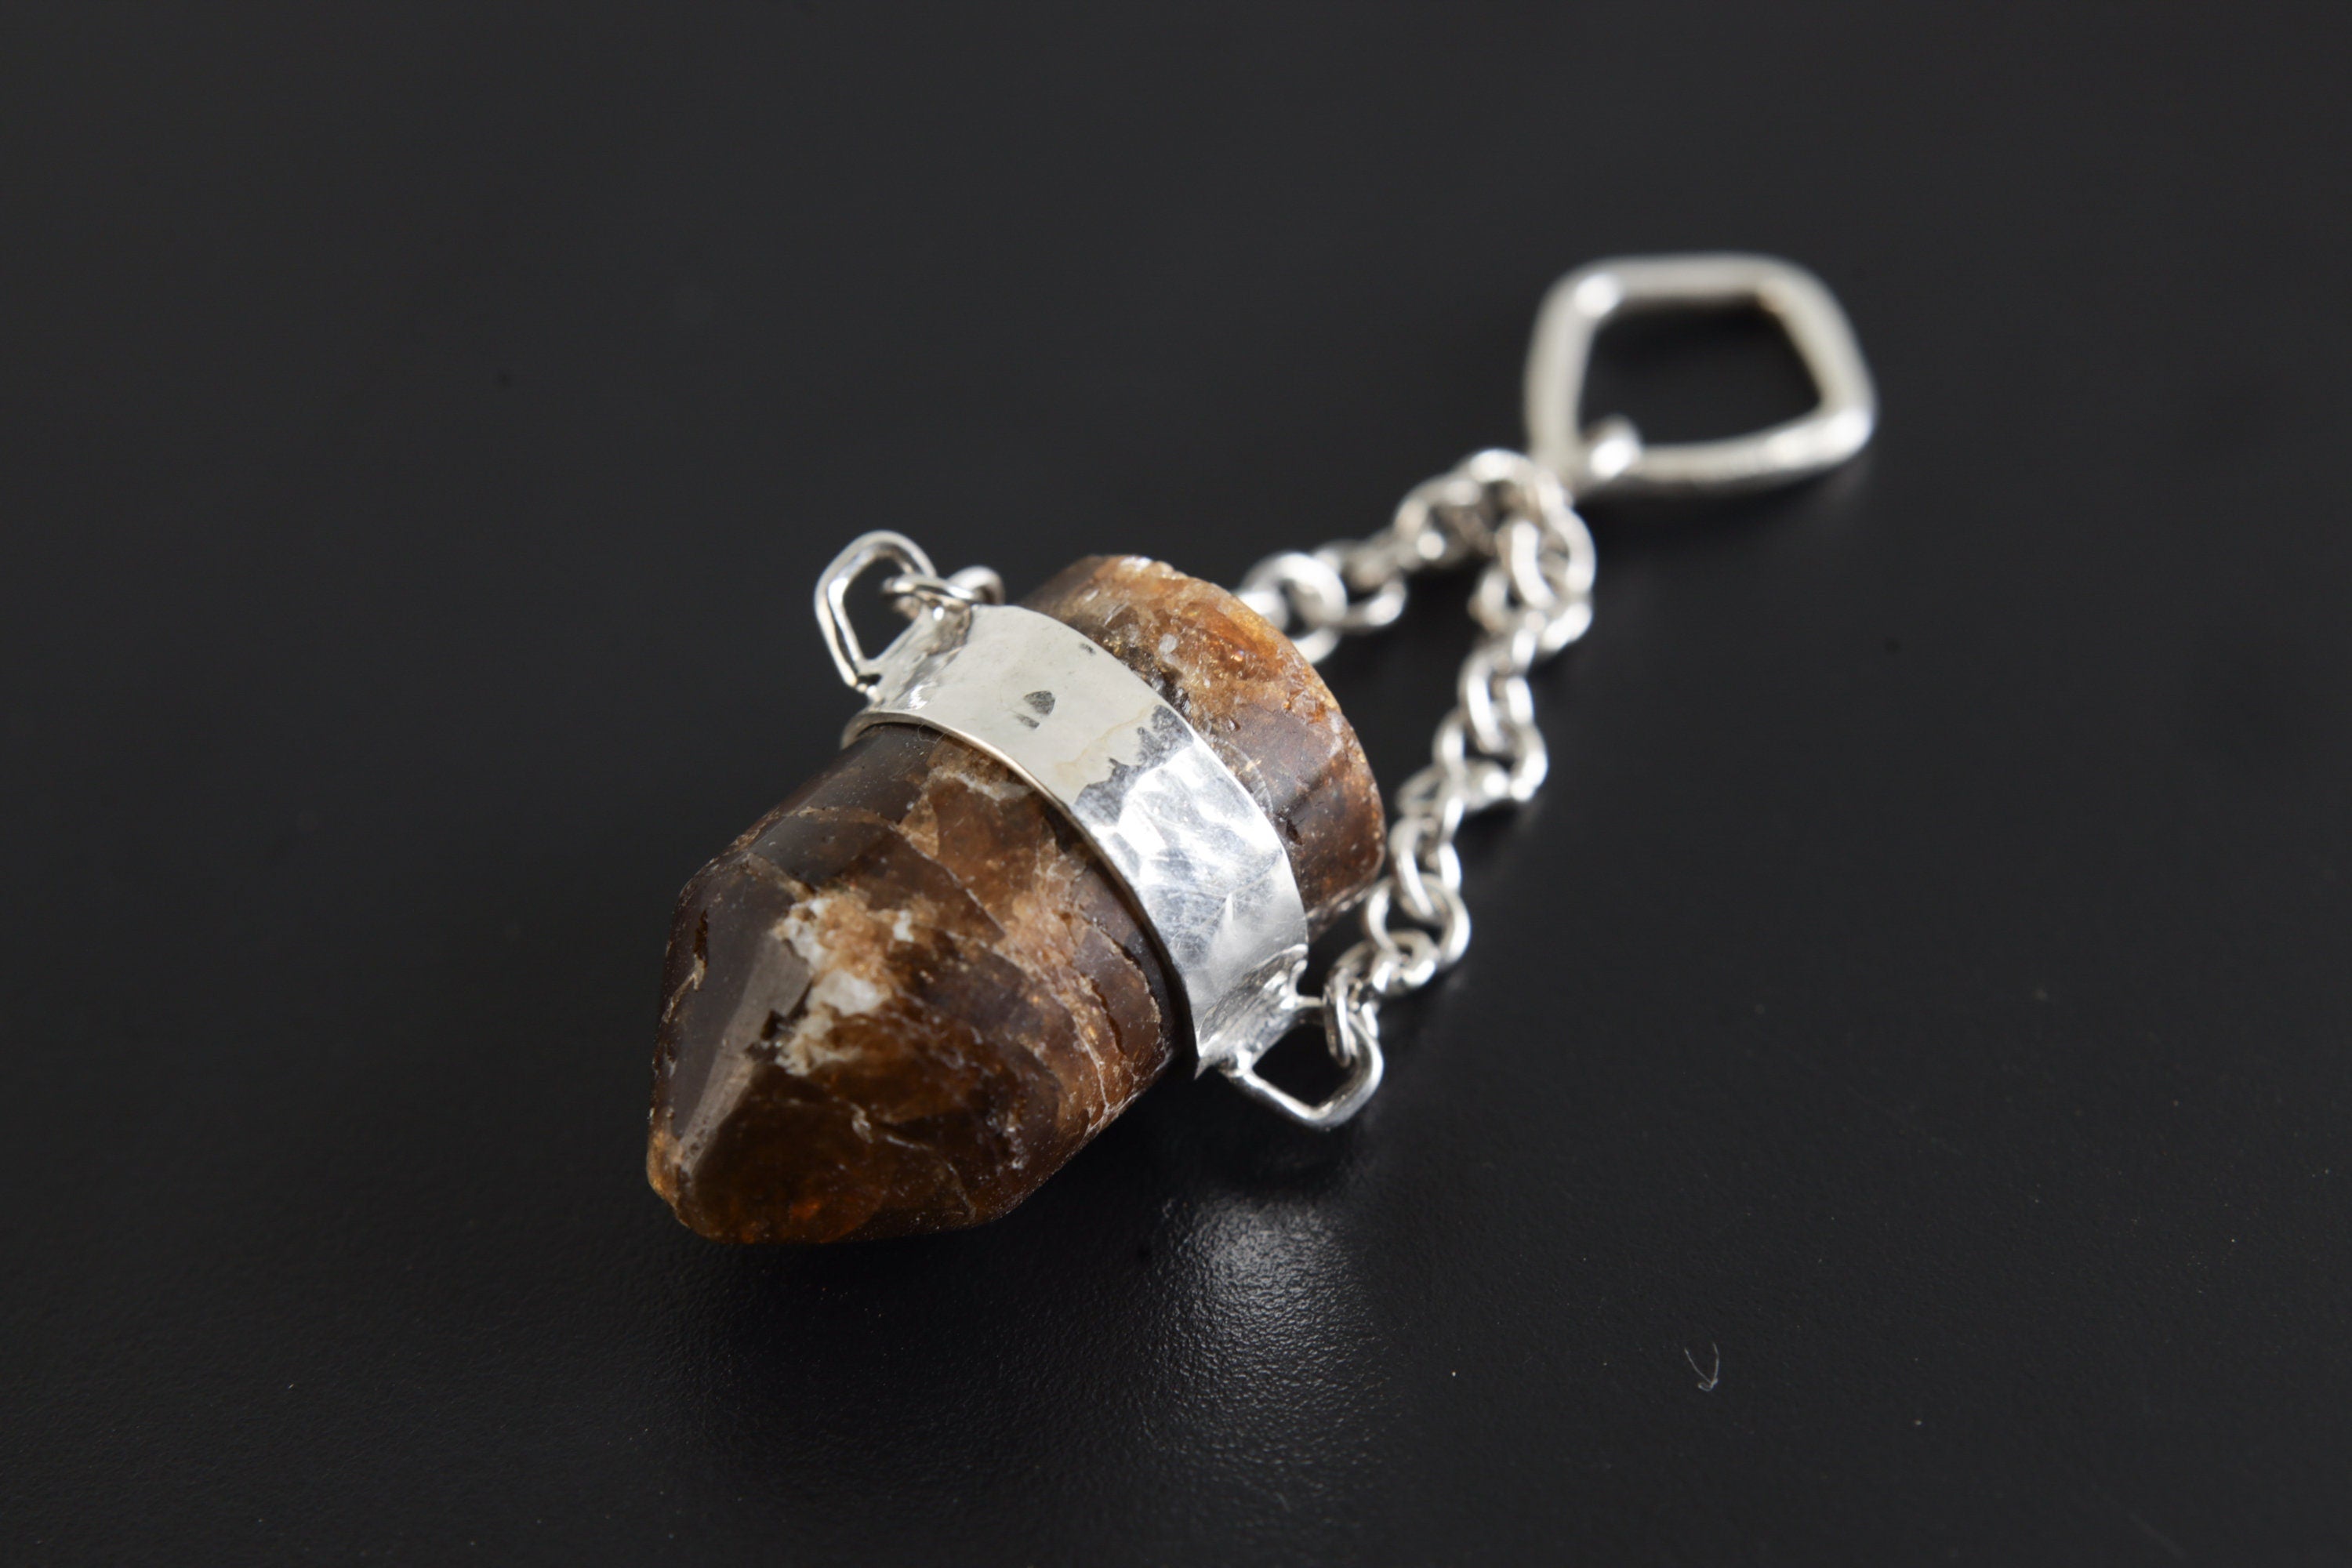 Brown Tourmaline Sterling Silver Crystal Pendant - High Polish Finish - Chain Bail - Wrapped in Textured Silver - Capricorn/Virgo